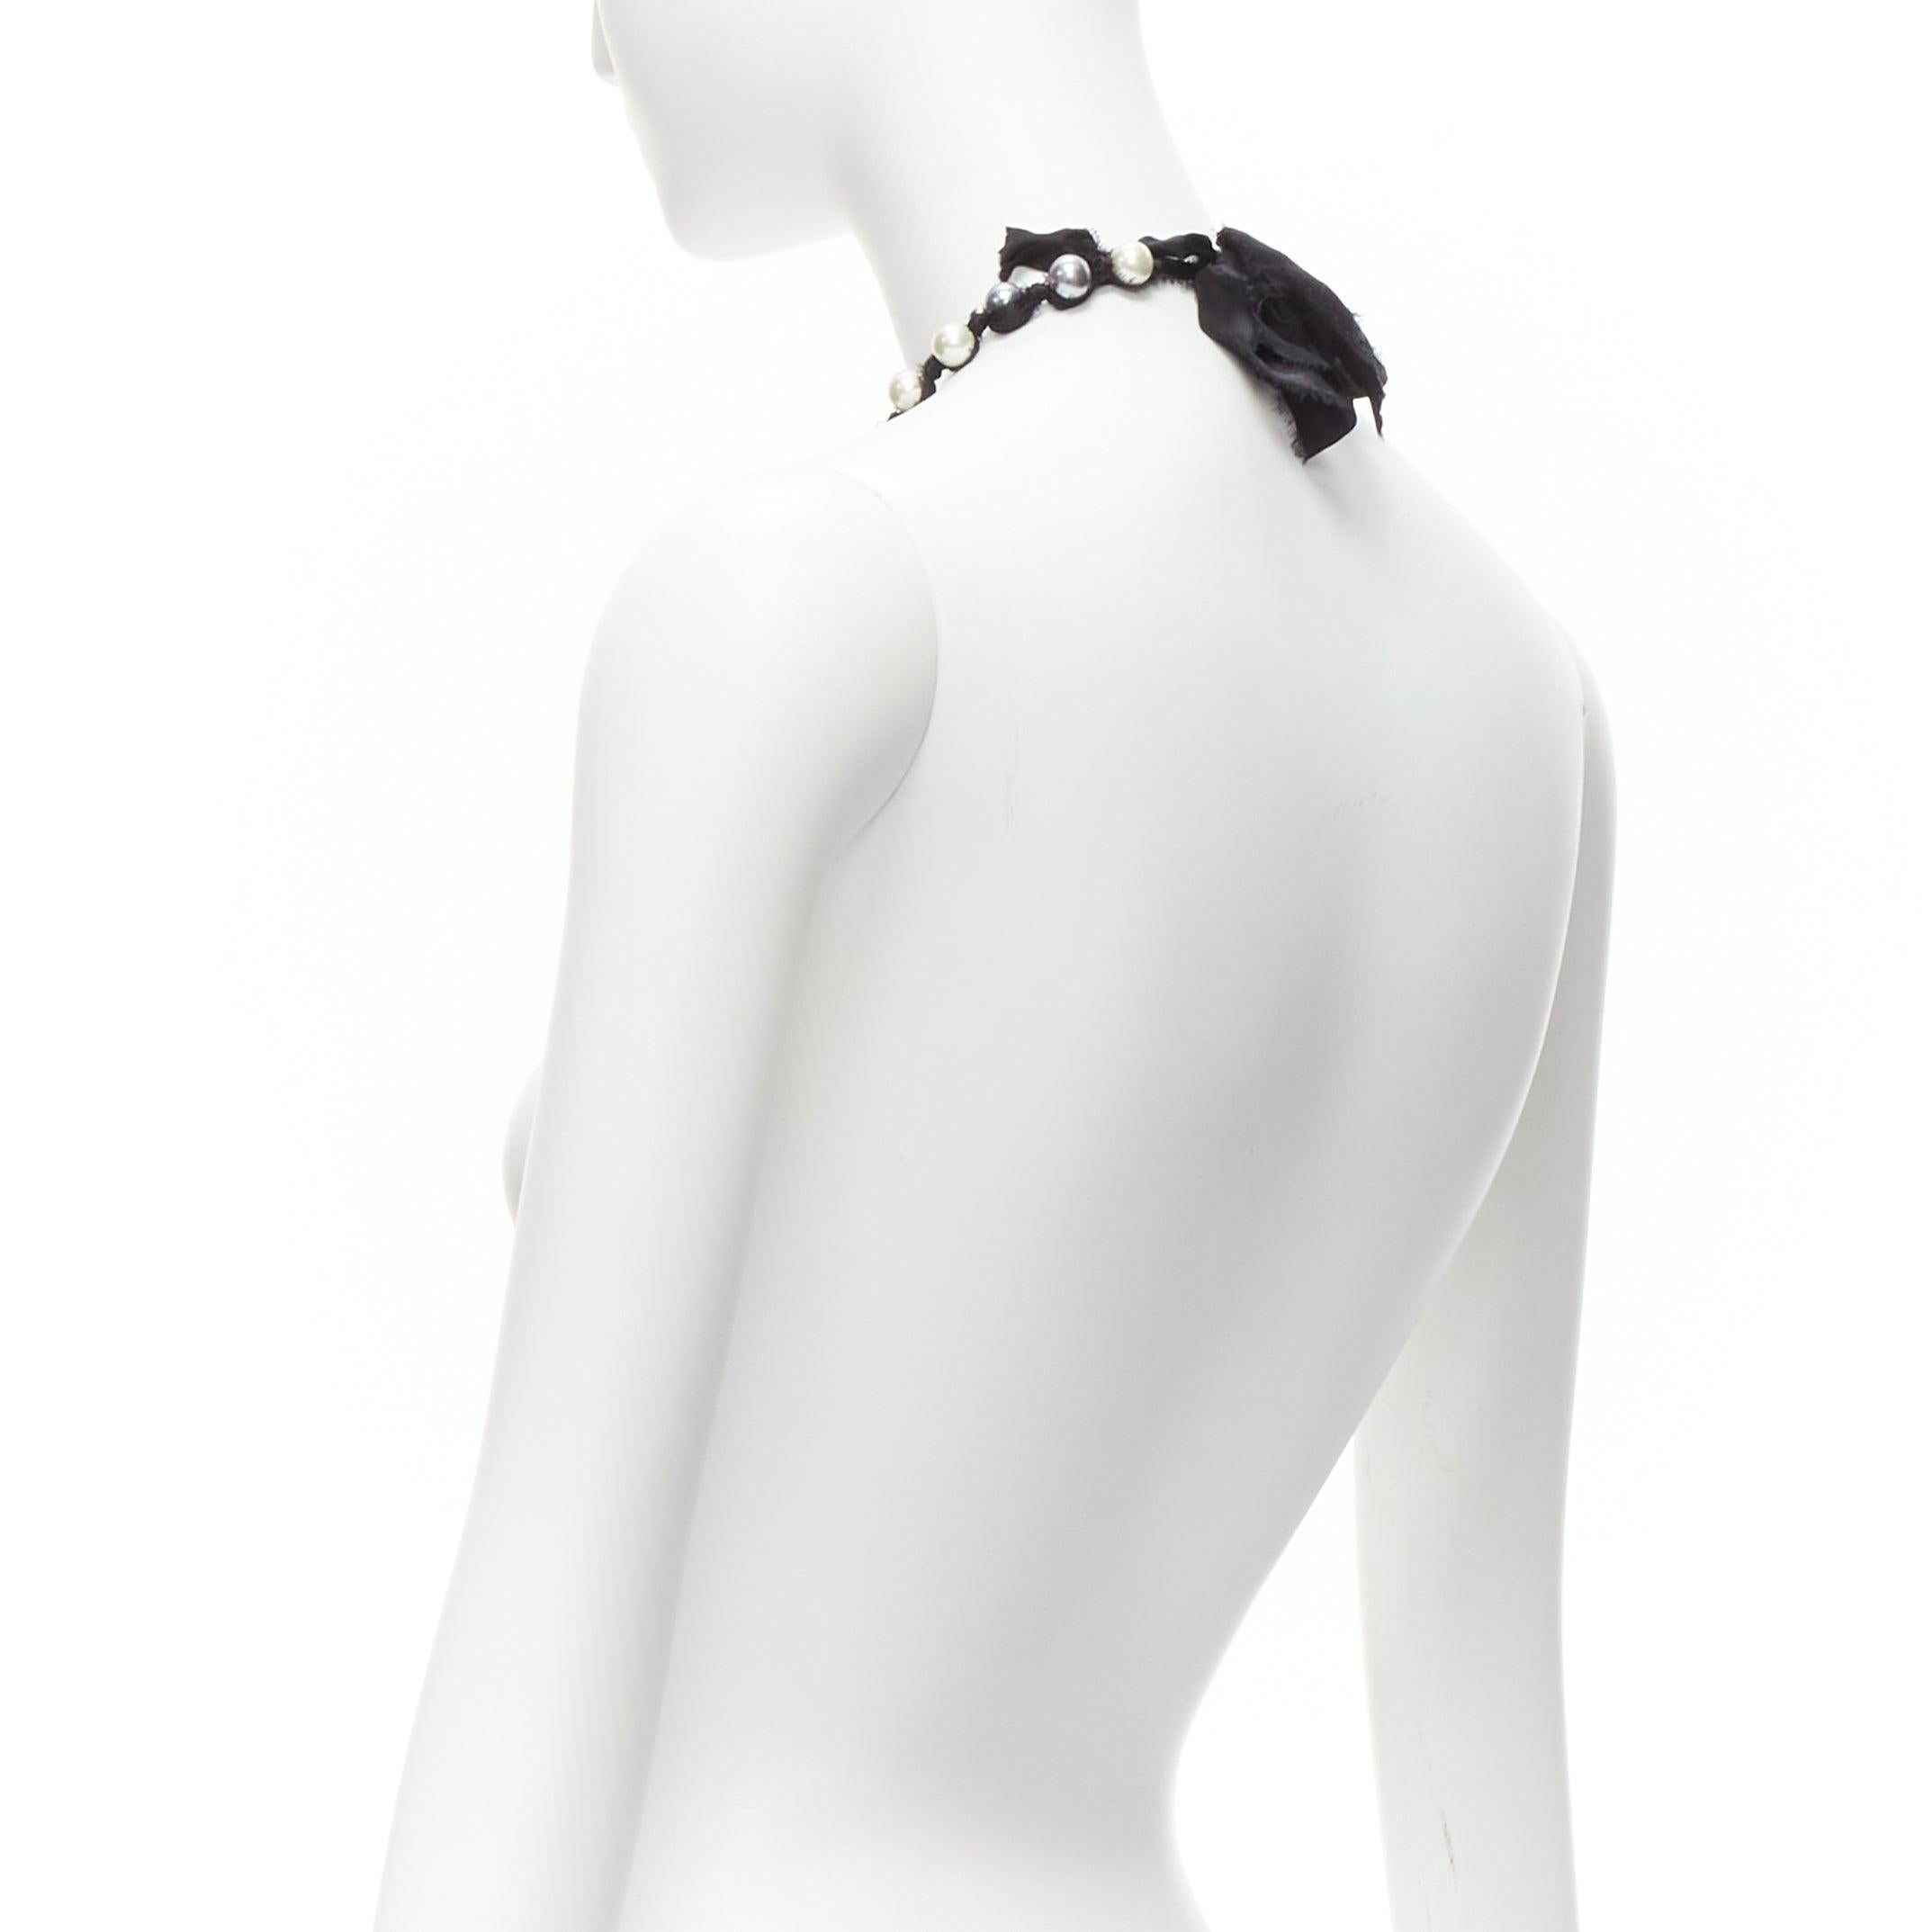 LANVIN ALBER ELBAZ cream charcoal black pearl silk ribbon wrapped long necklace For Sale 2